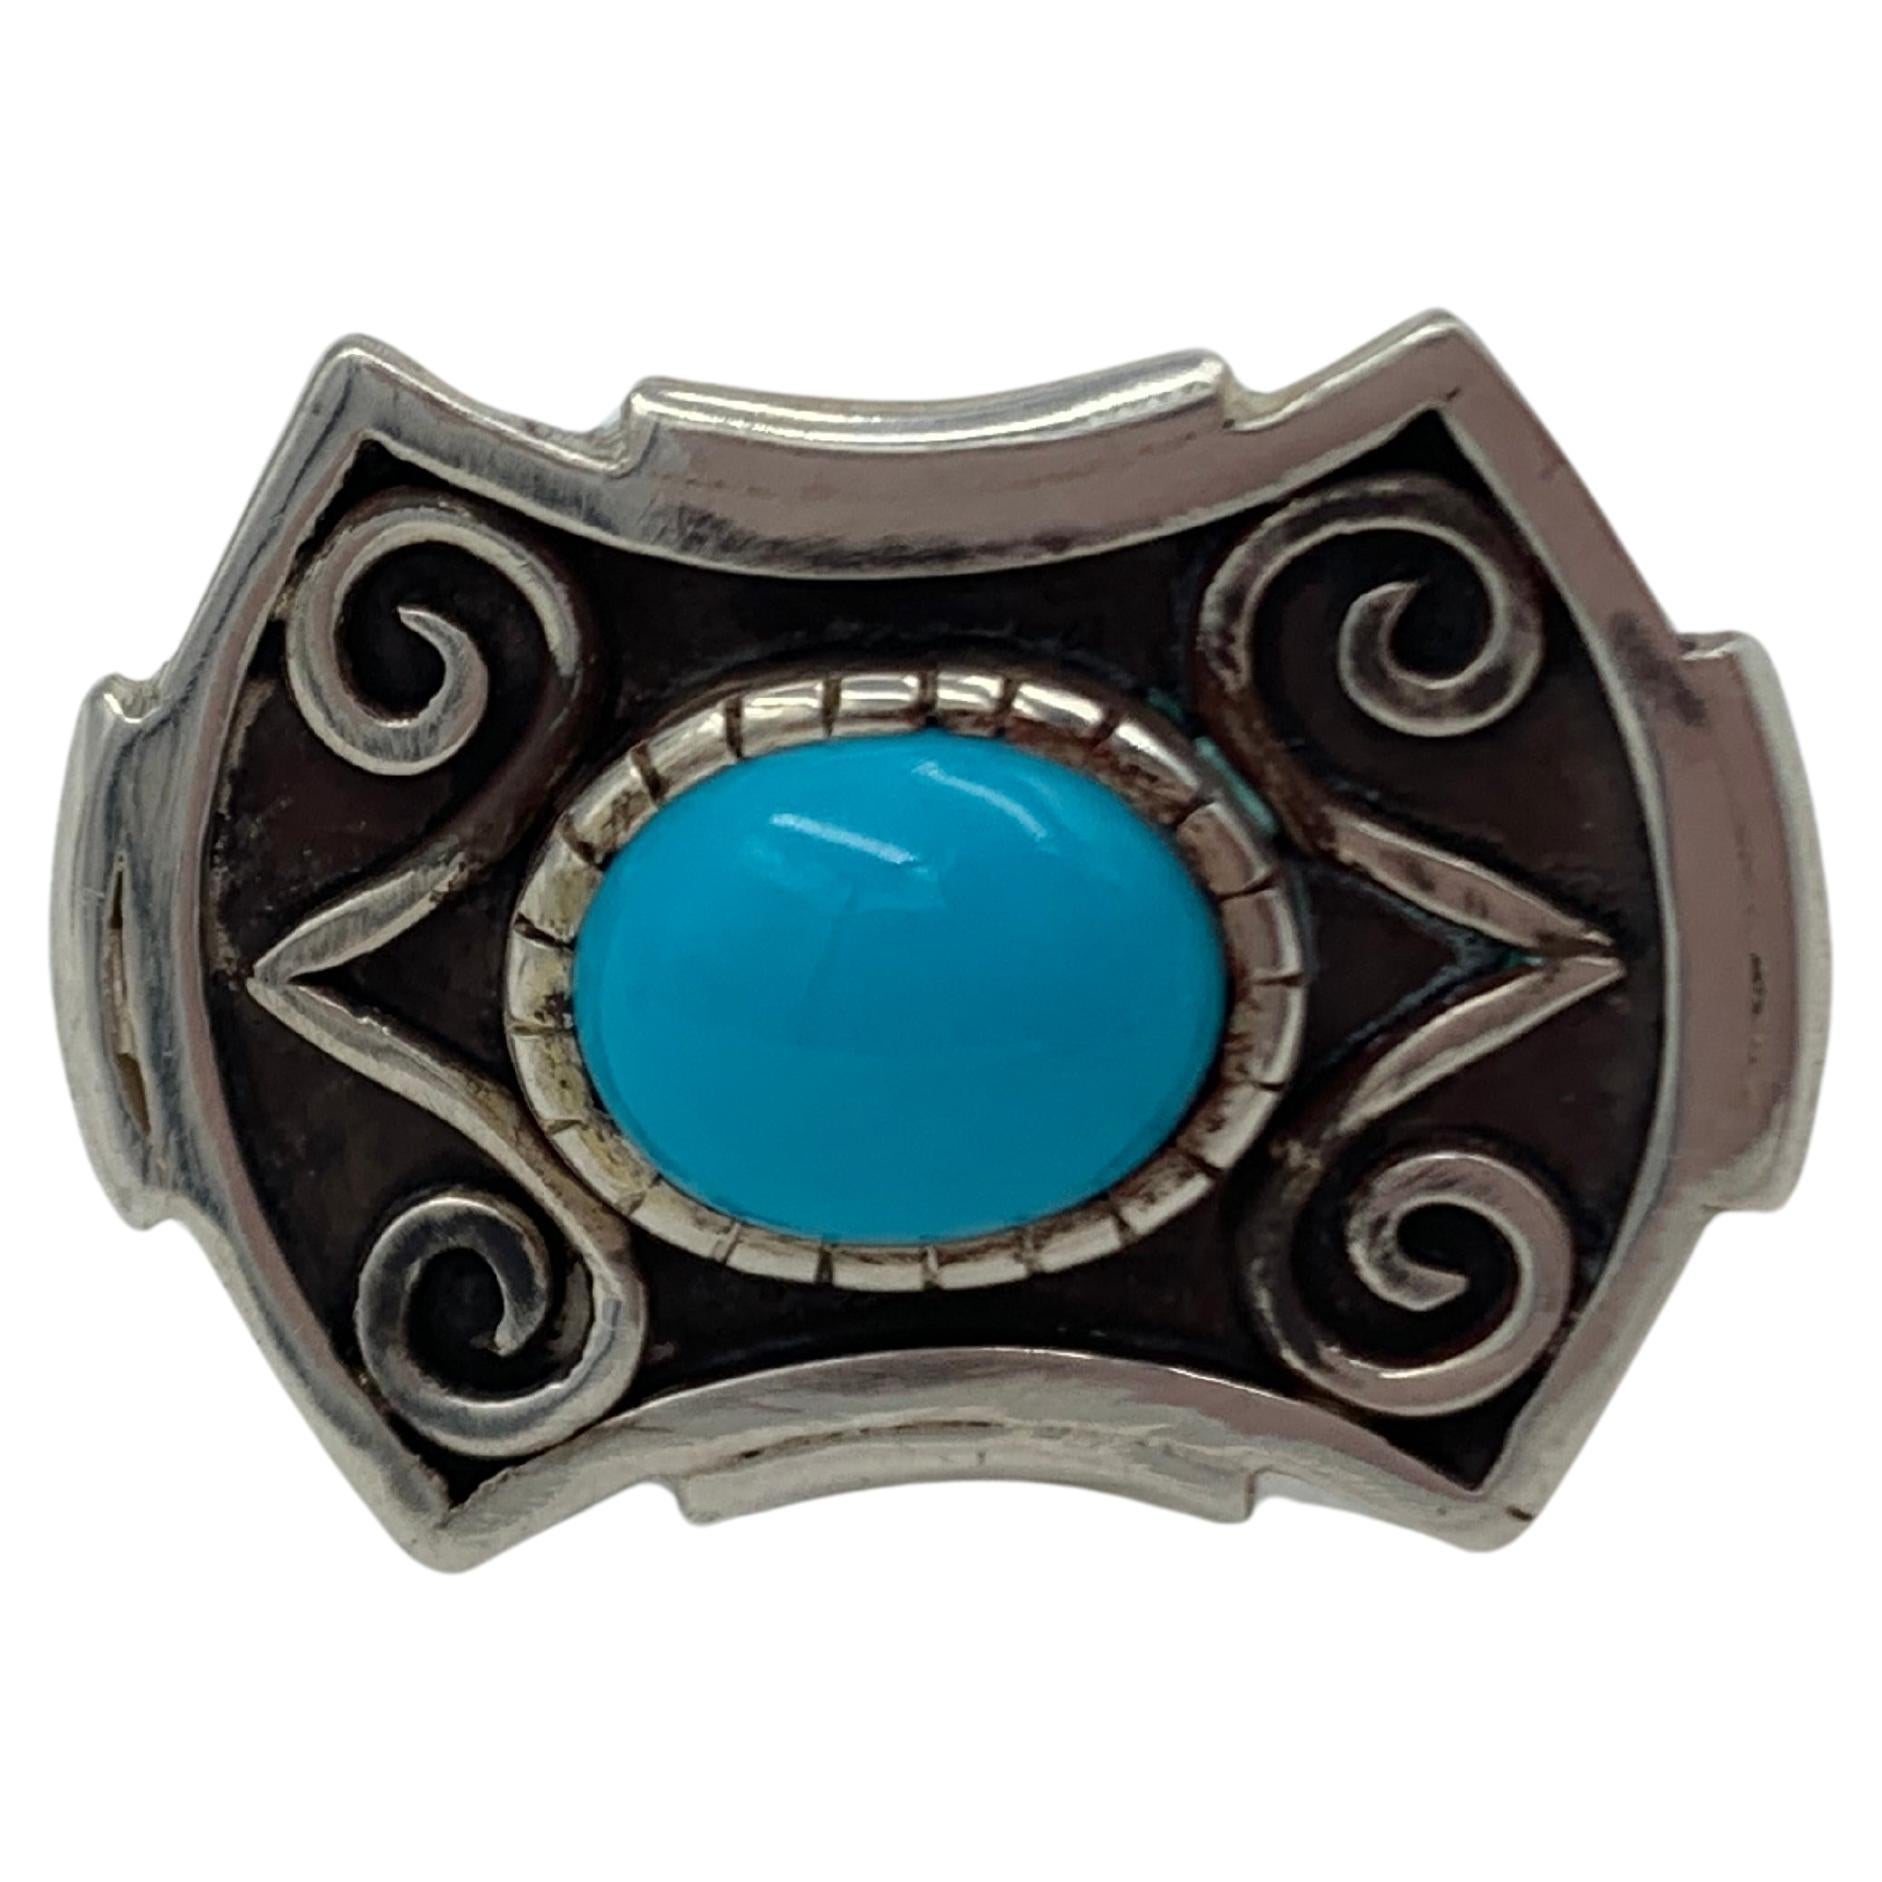 Native American Sterling Silver Cuff Links with Sleeping Beauty Turquoise Cabochon For Sale